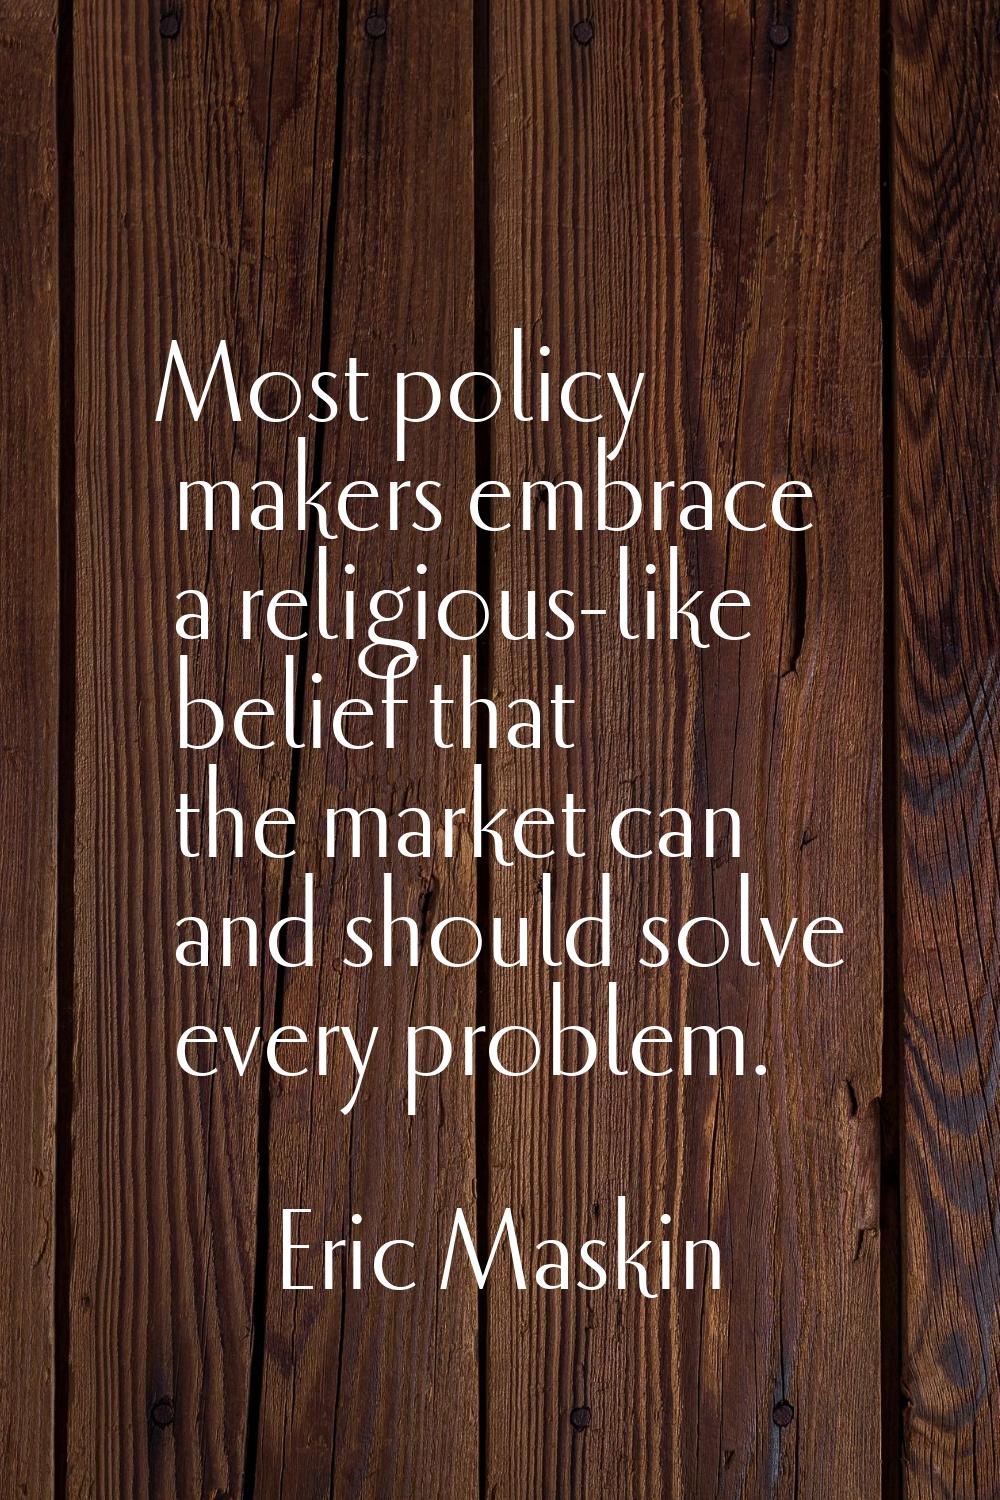 Most policy makers embrace a religious-like belief that the market can and should solve every probl